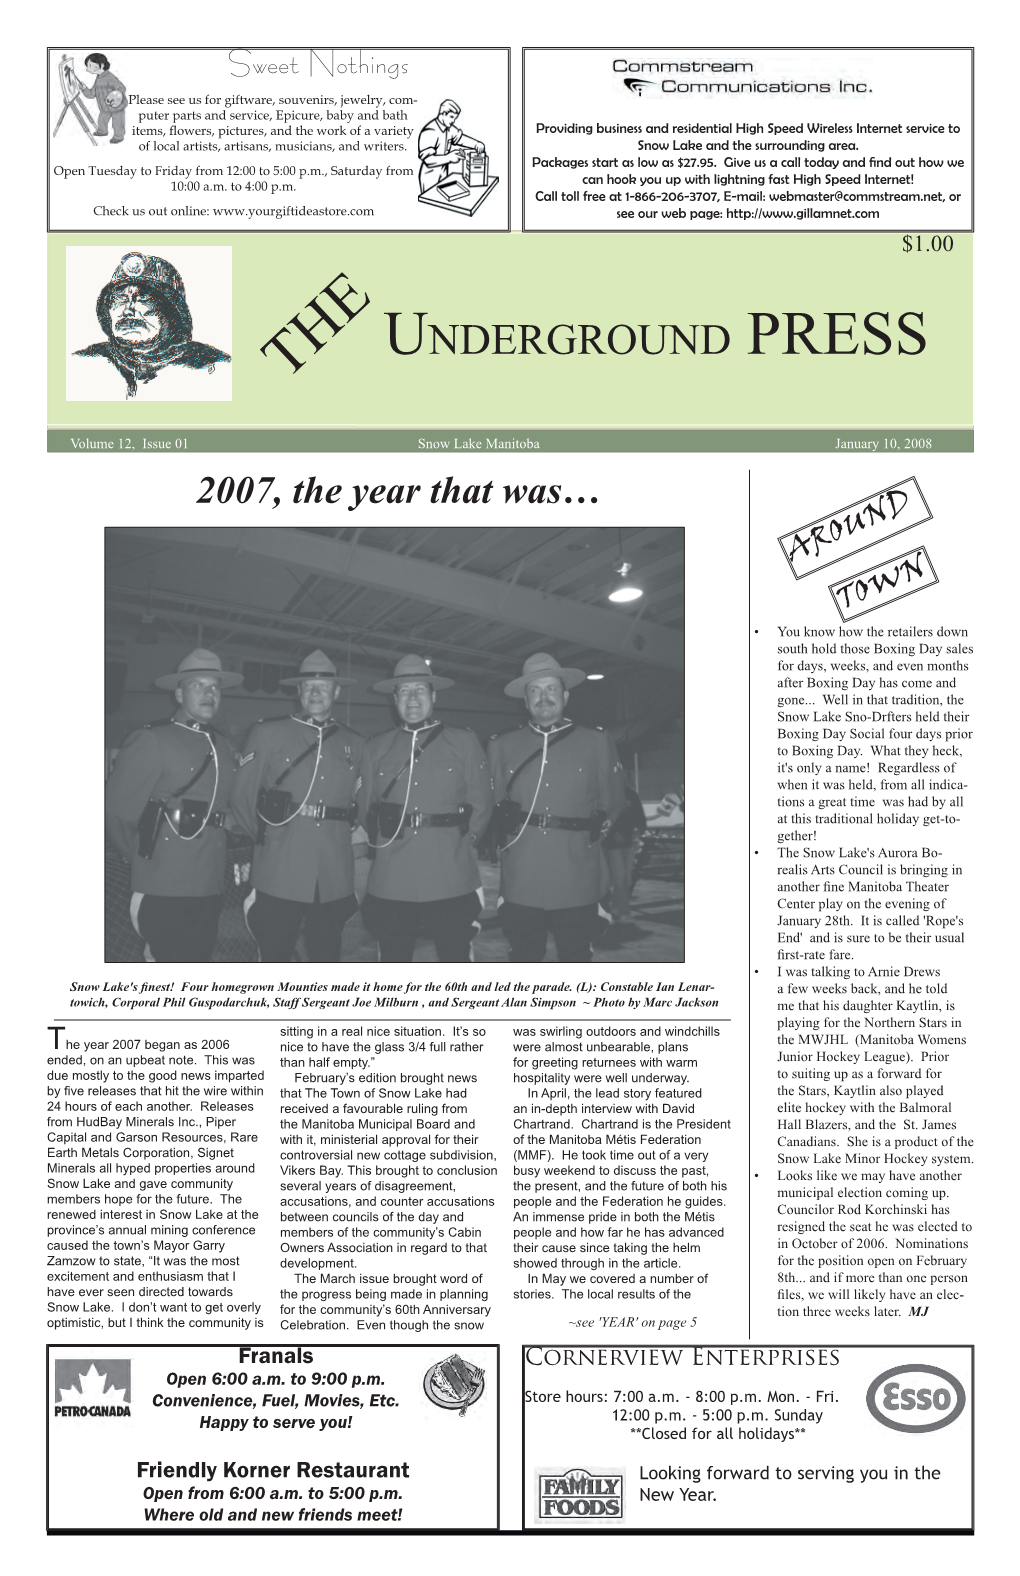 Underground PRESS January 10, 2008 Editorial Boxing Day with the Beckings